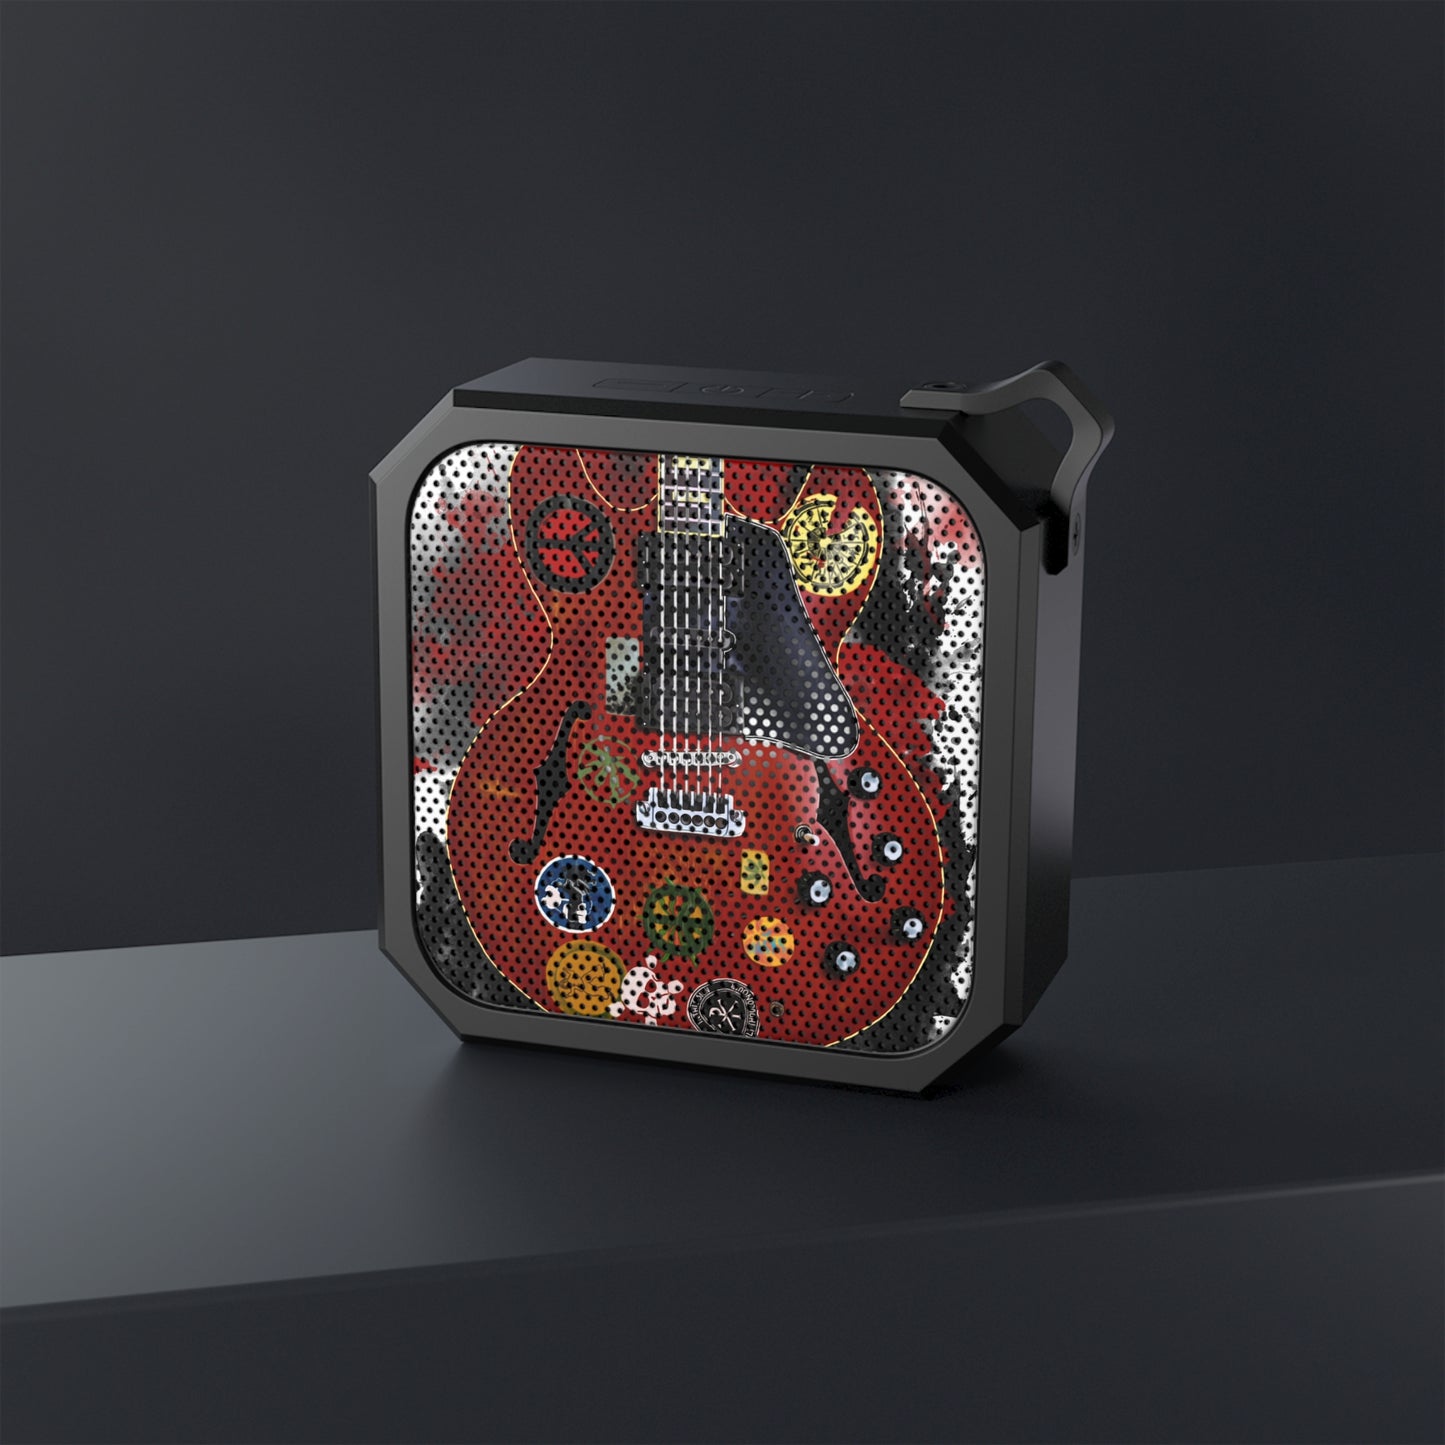 digital painting of a vintage red electric guitar with stickers printed on a bluetooth speaker